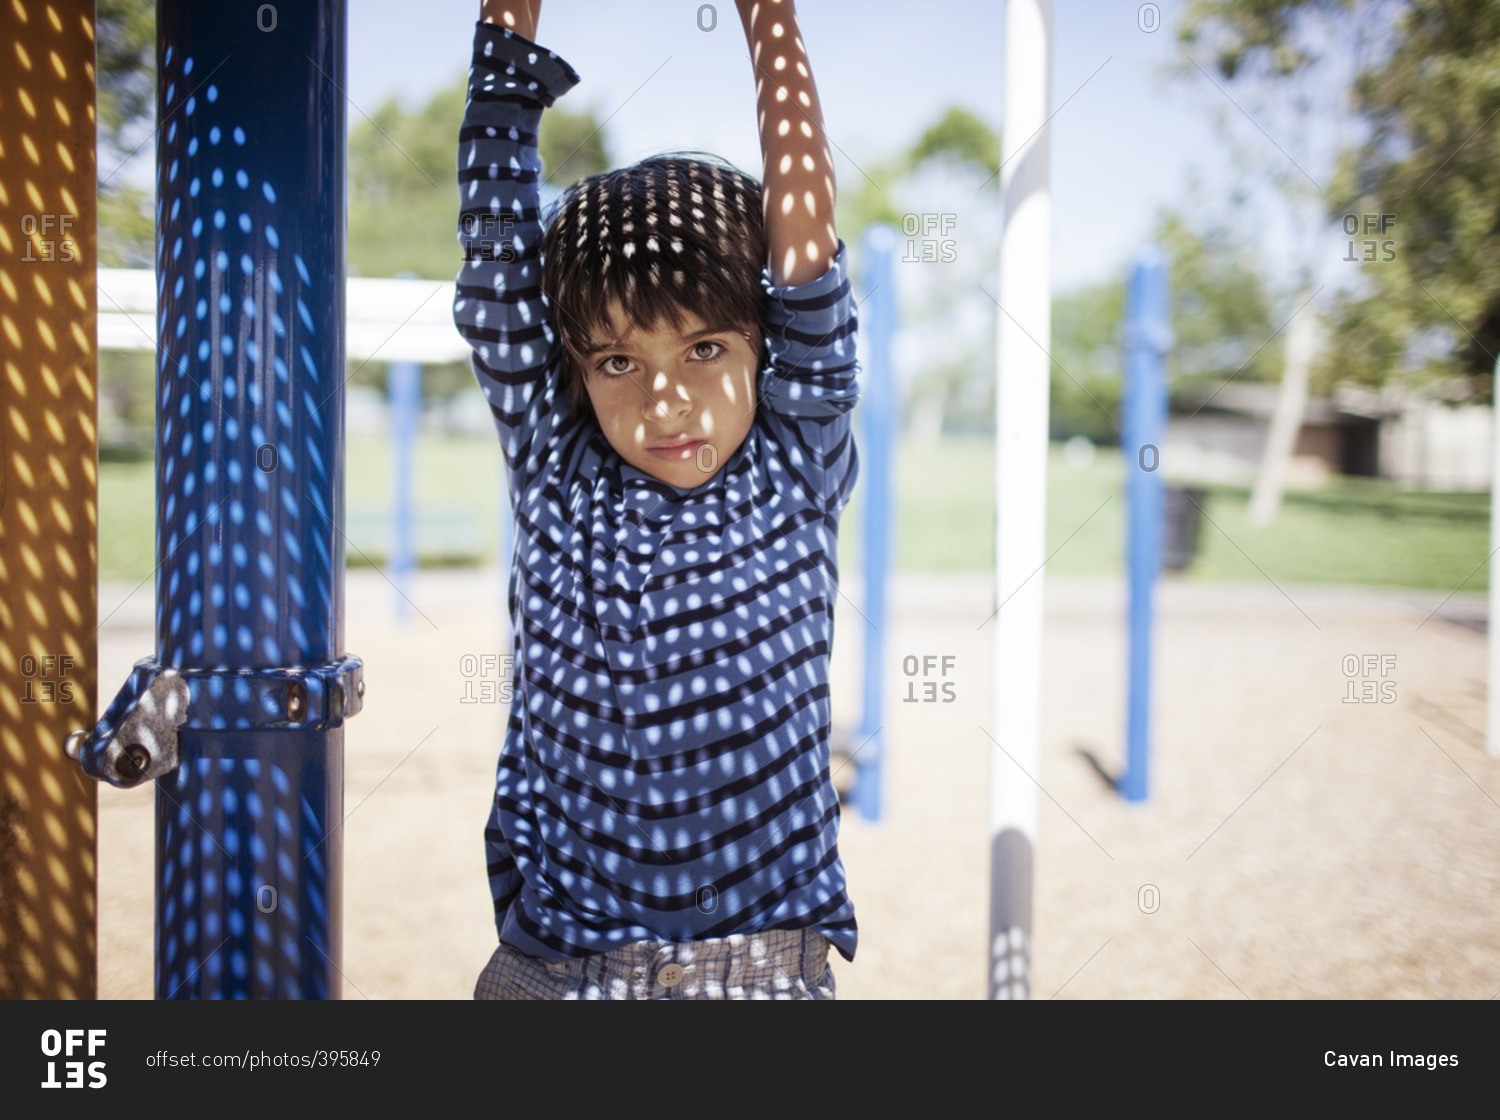 Portrait of boy hanging from outdoor play equipment at playground